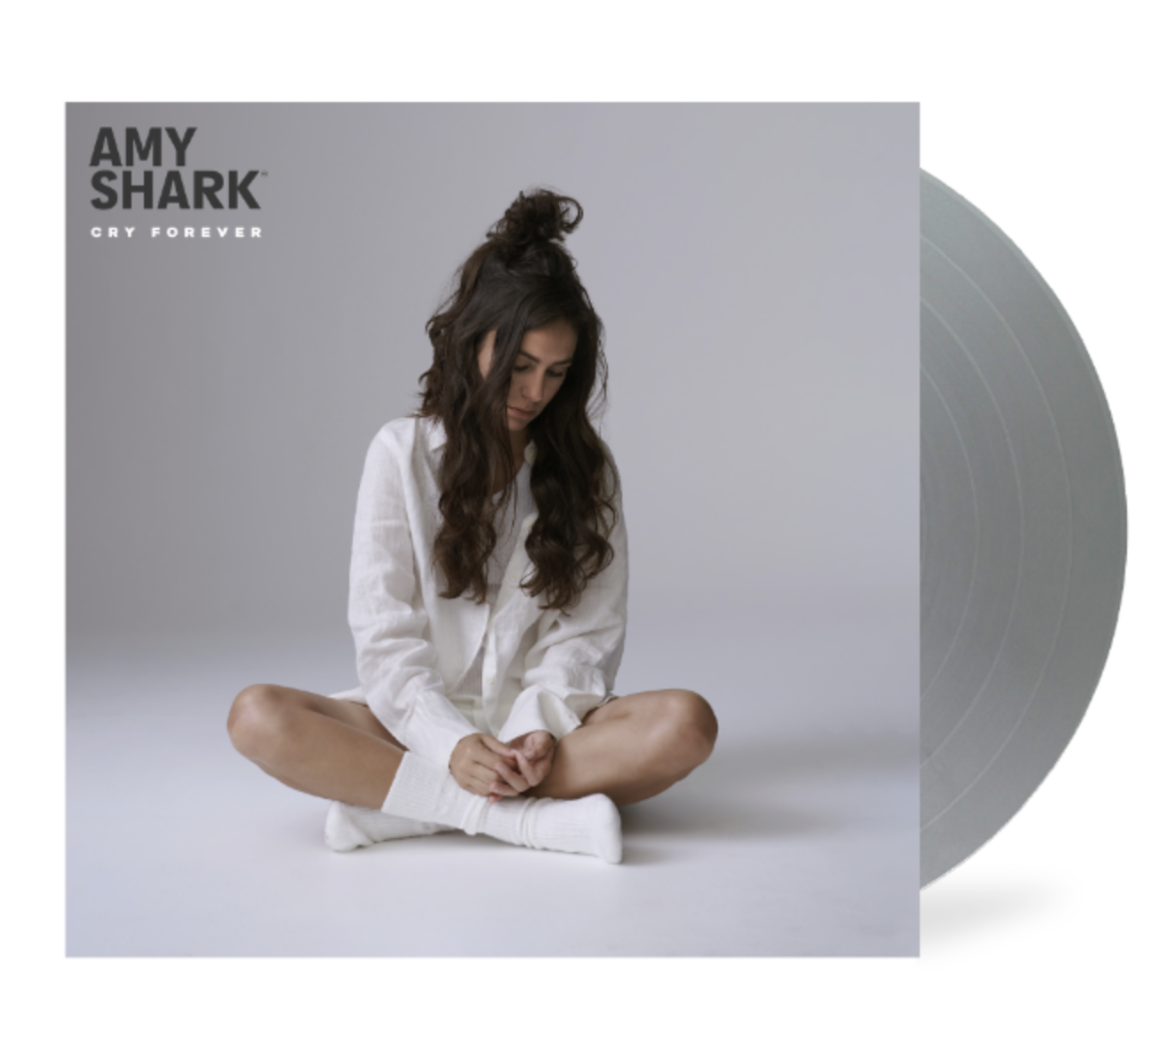 Amy Shark – Cry Forever